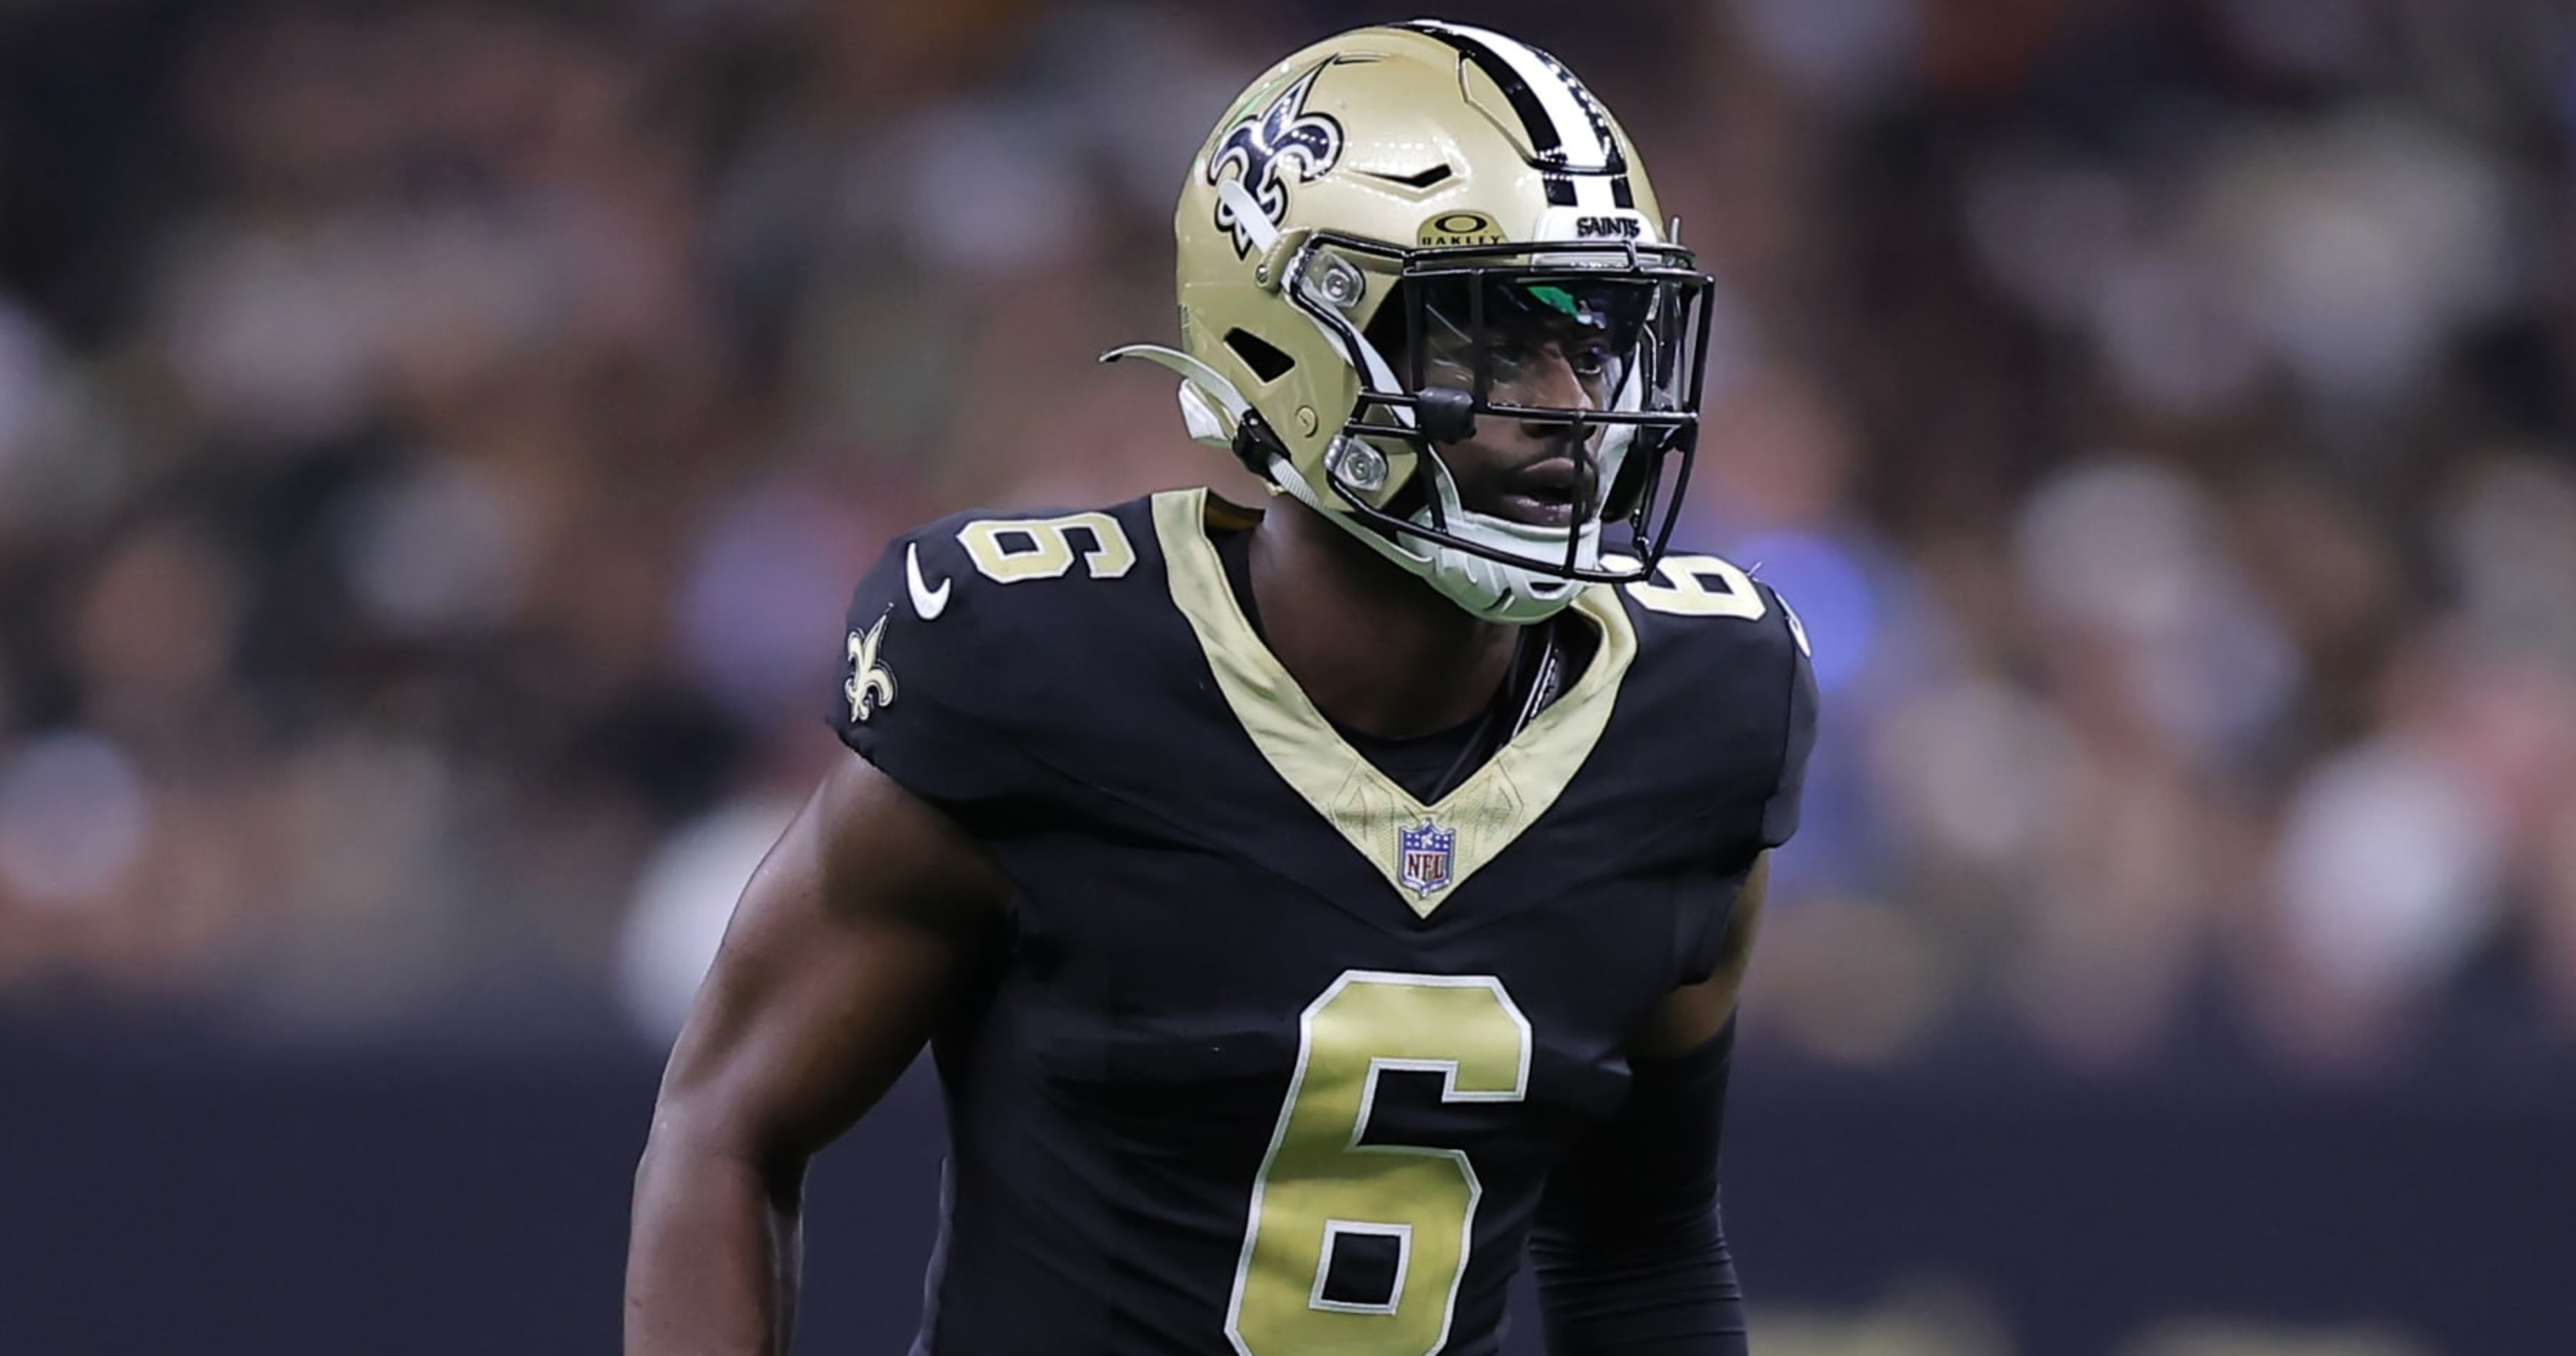 Saints' Marcus Maye Suspended 3 Games After Violating NFL's Substance Abuse Policy